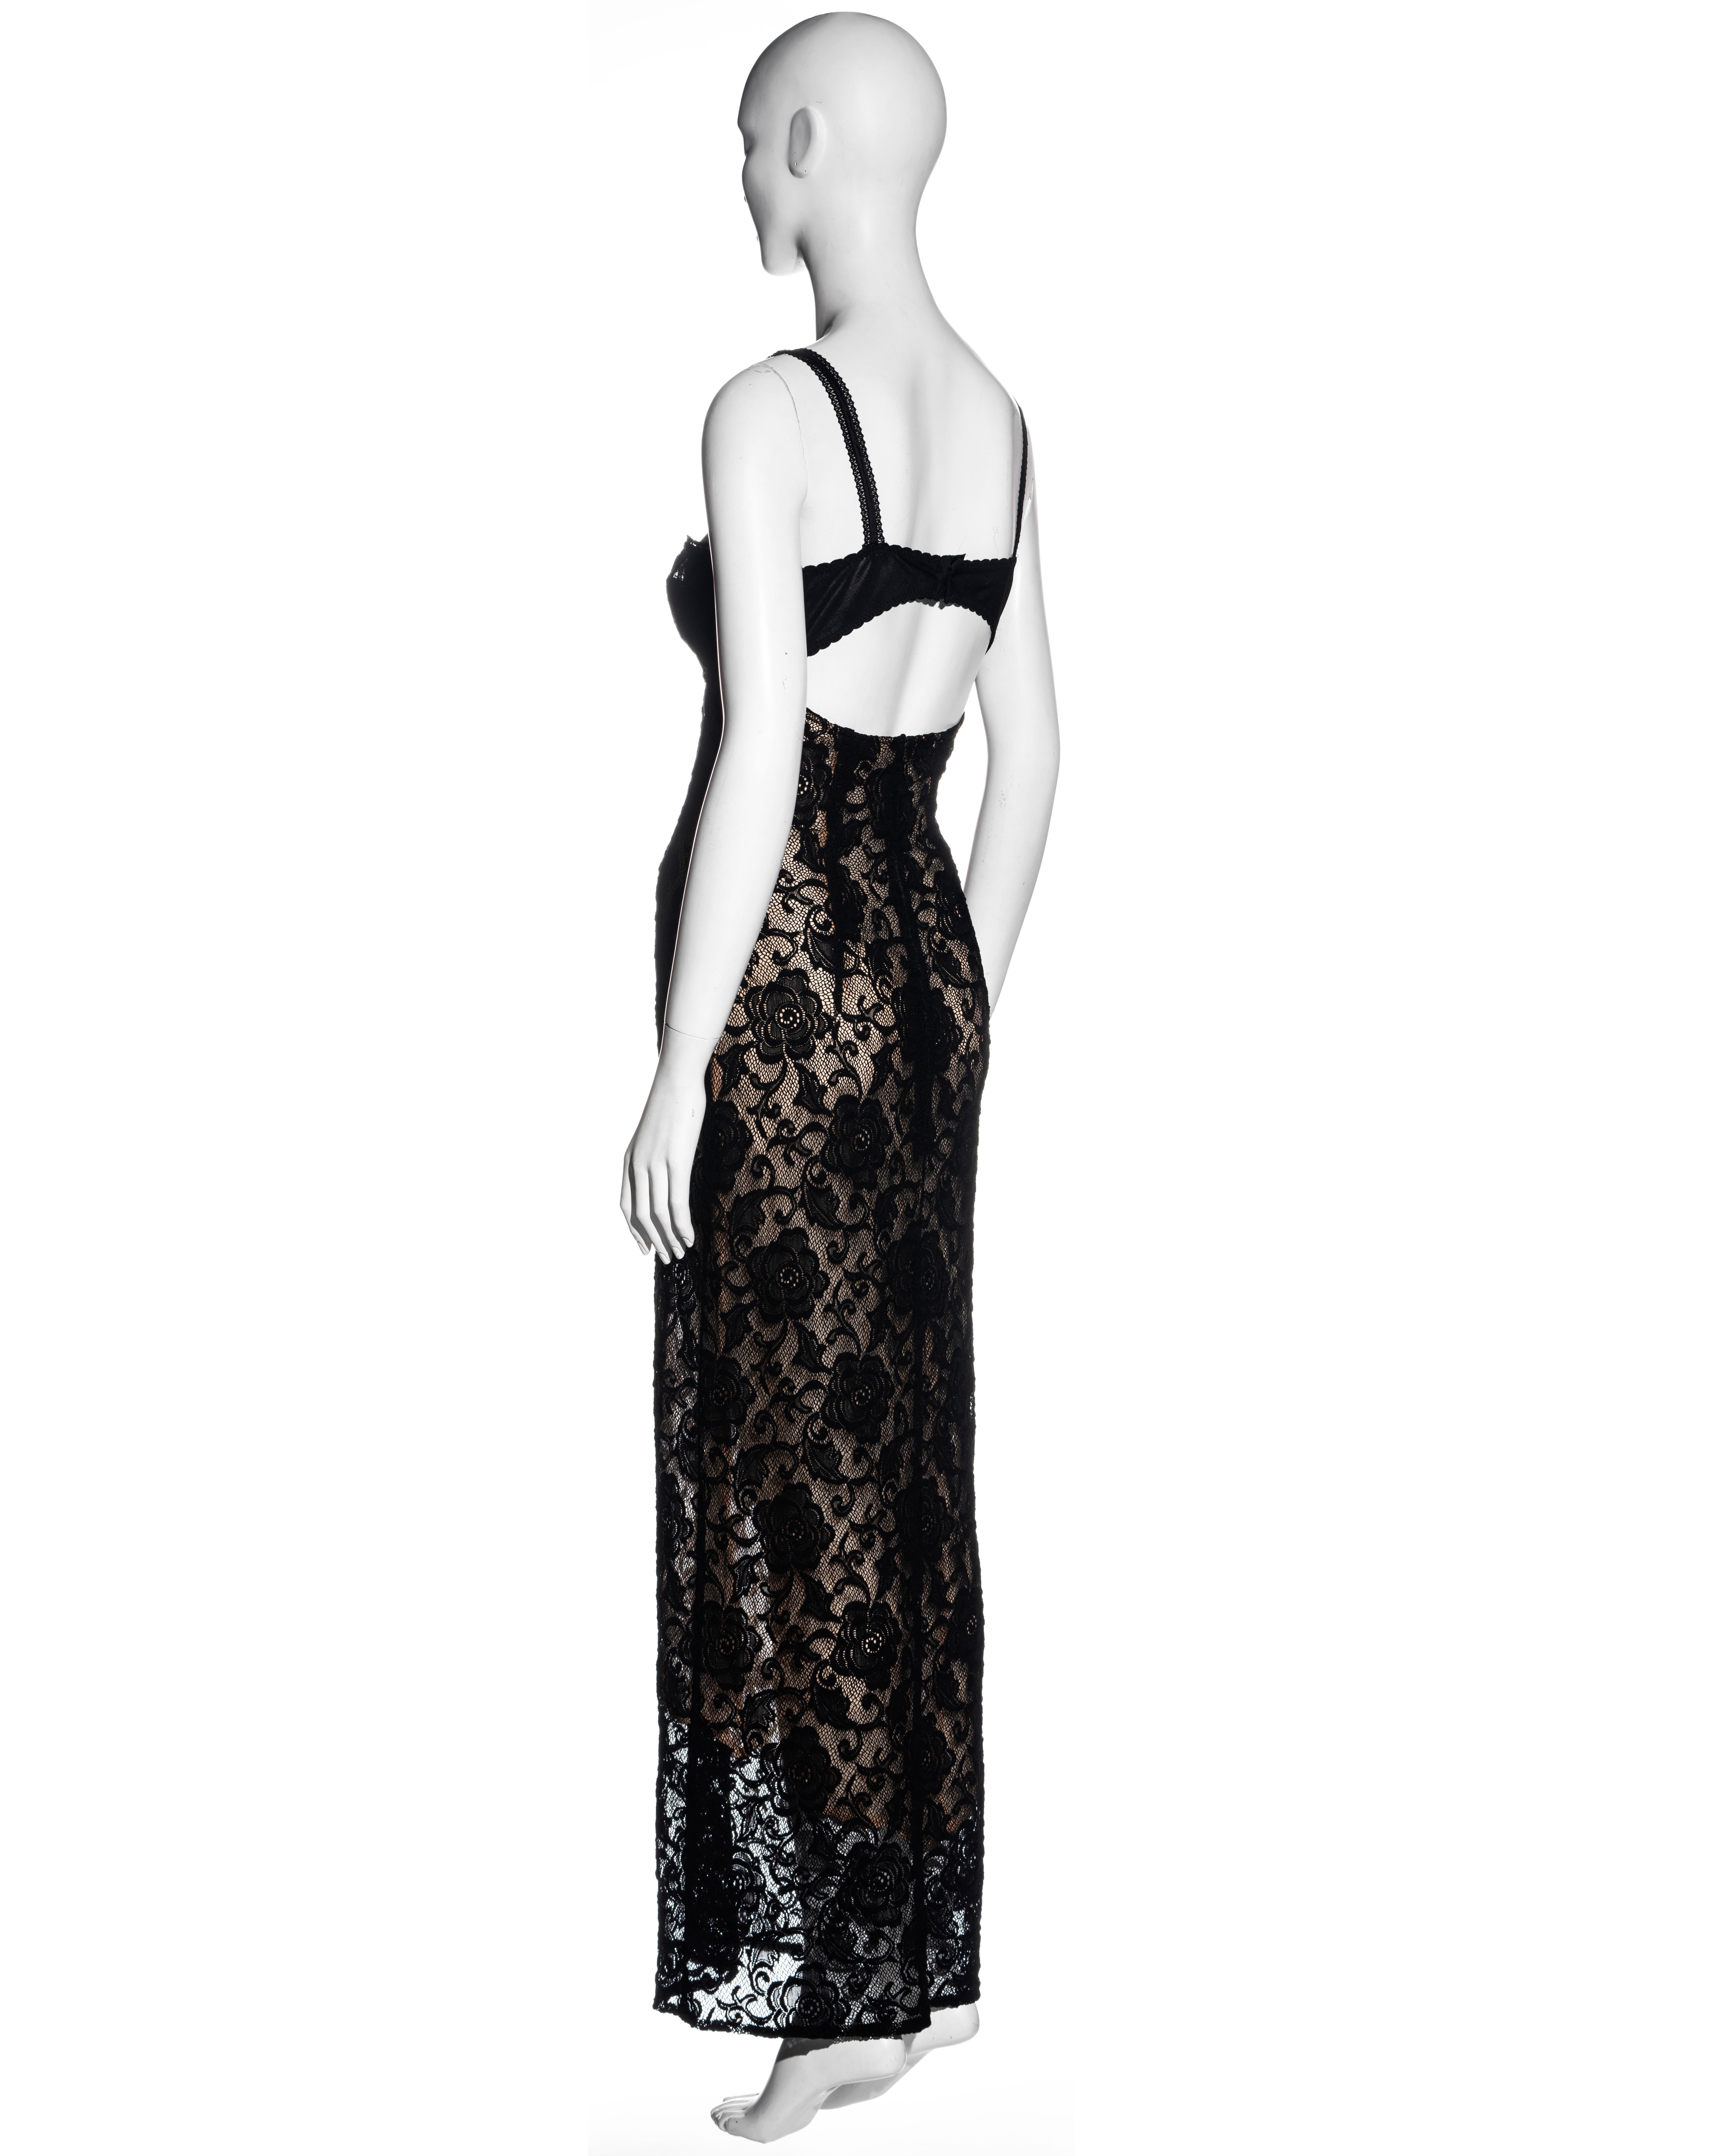 Women's Dolce & Gabbana black lace evening dress with attached bra, ss 1997